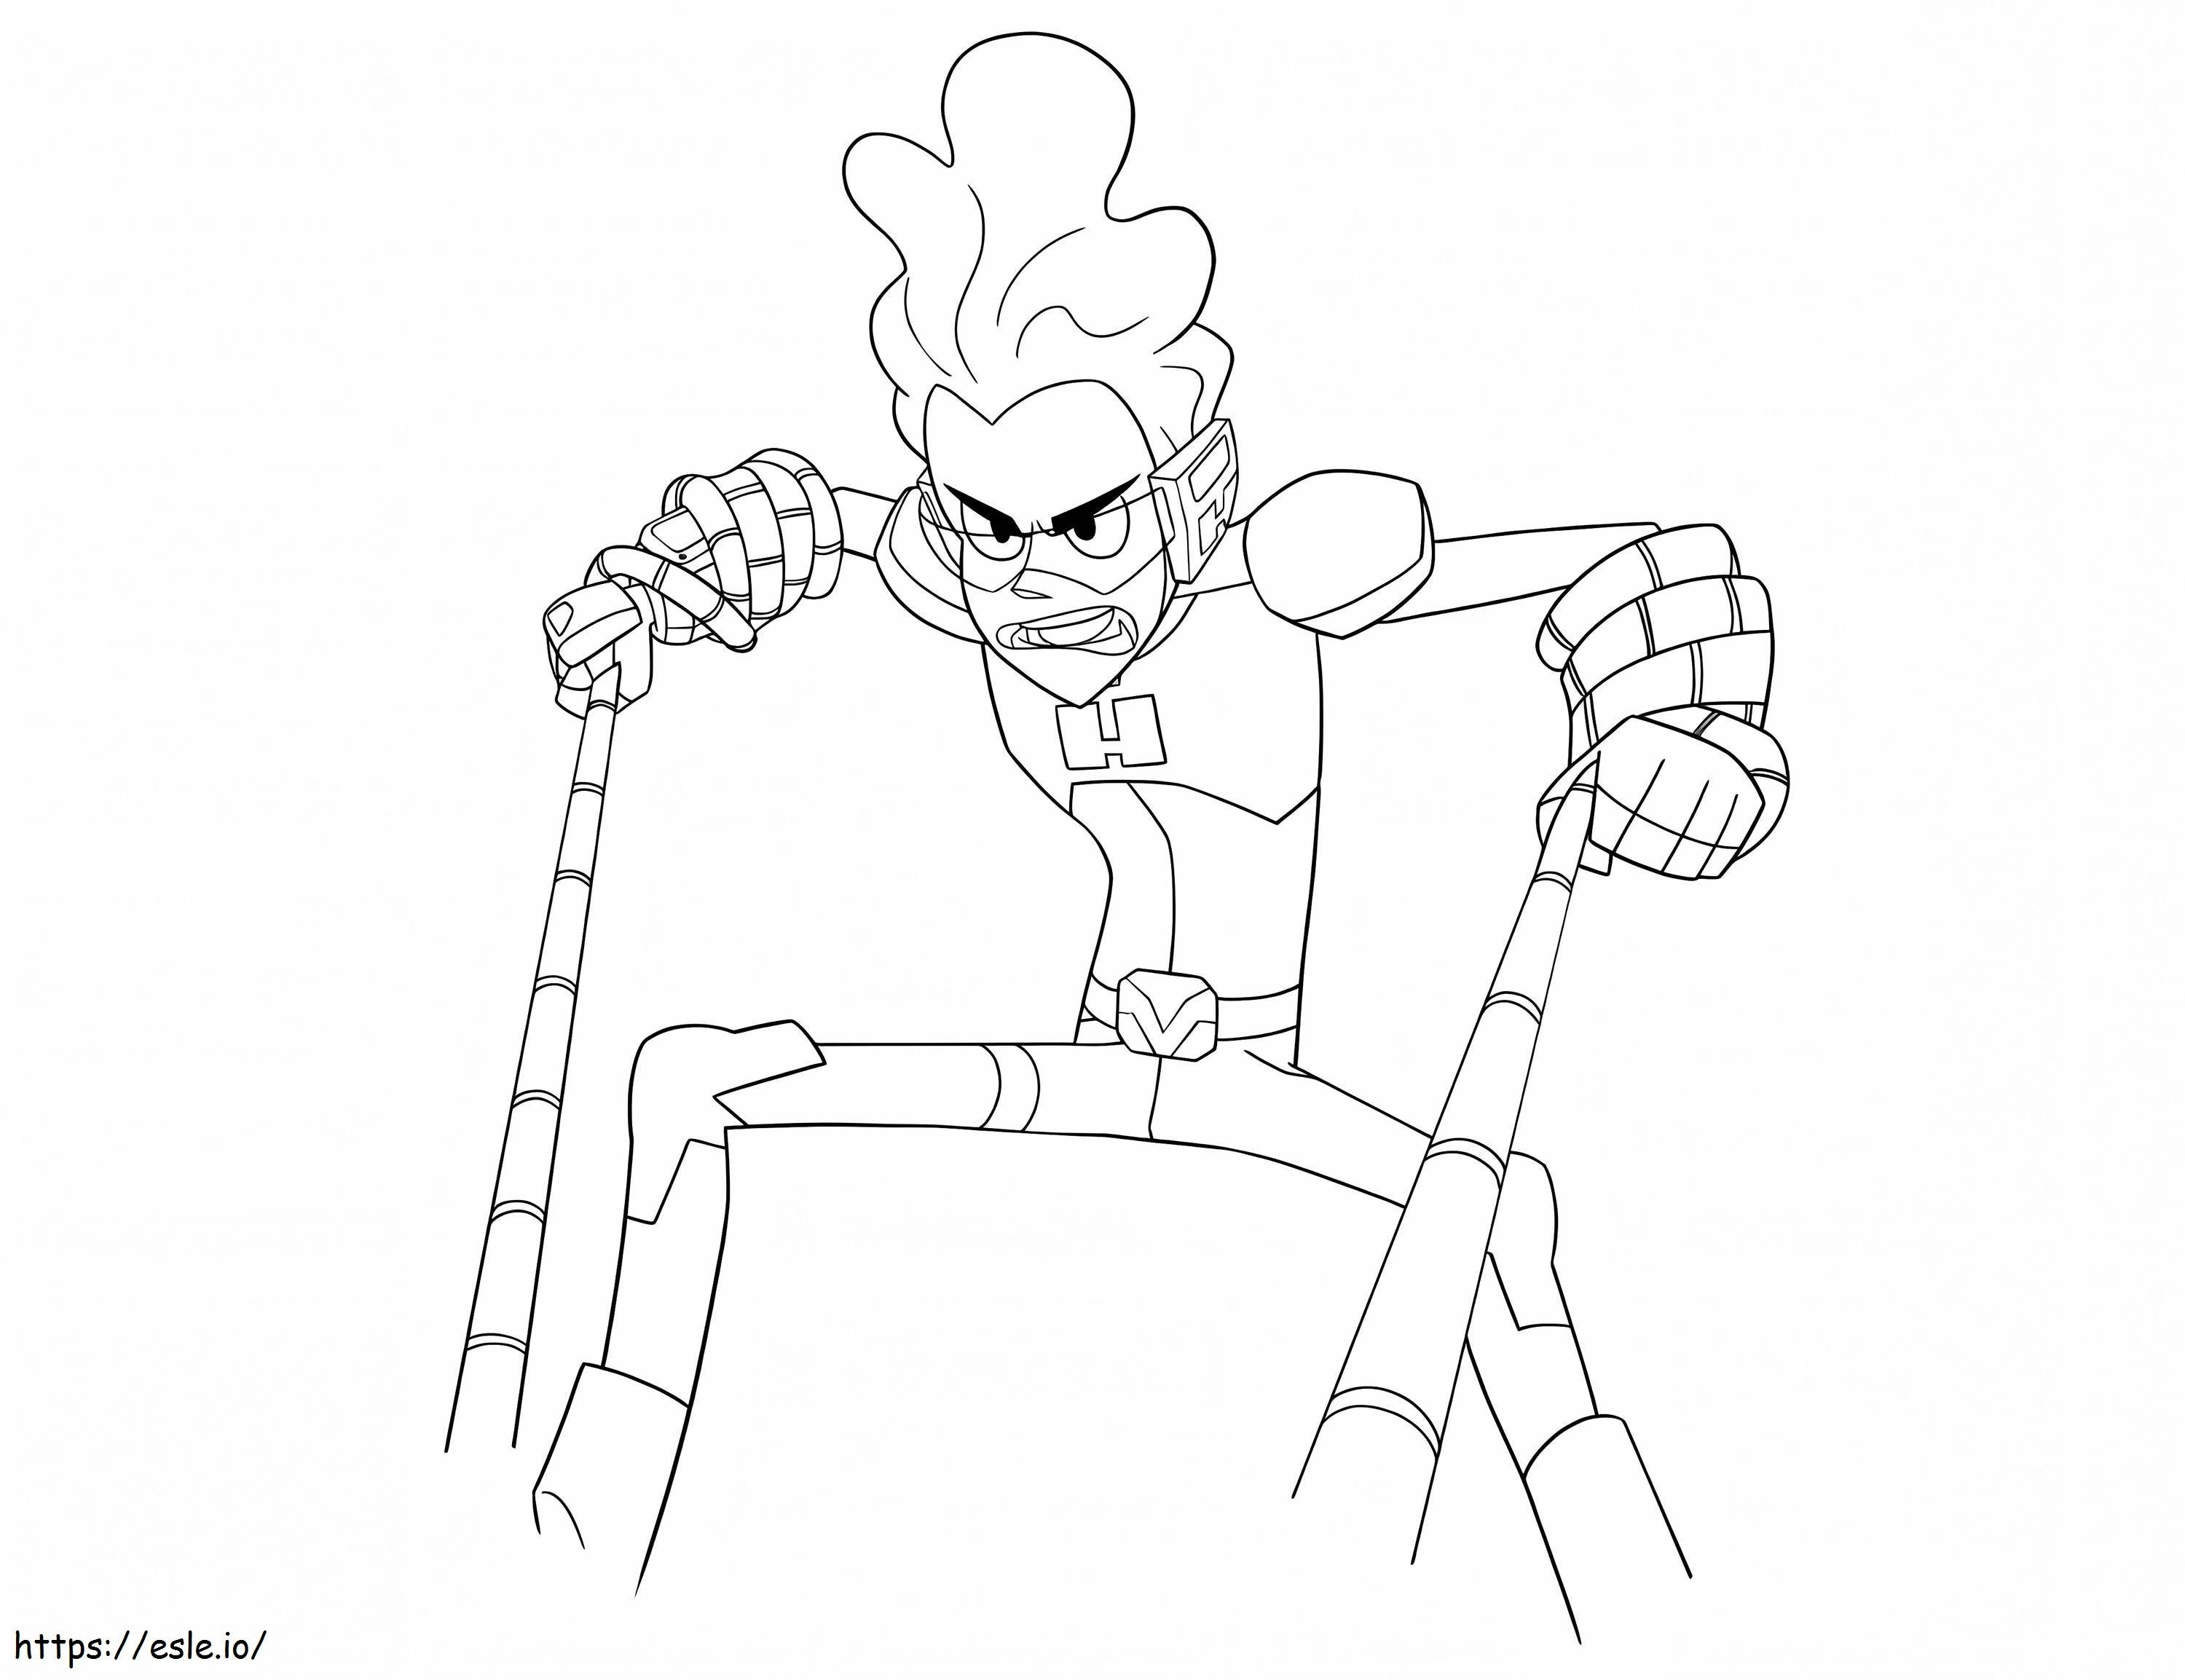 High Five From Glitch Techs coloring page